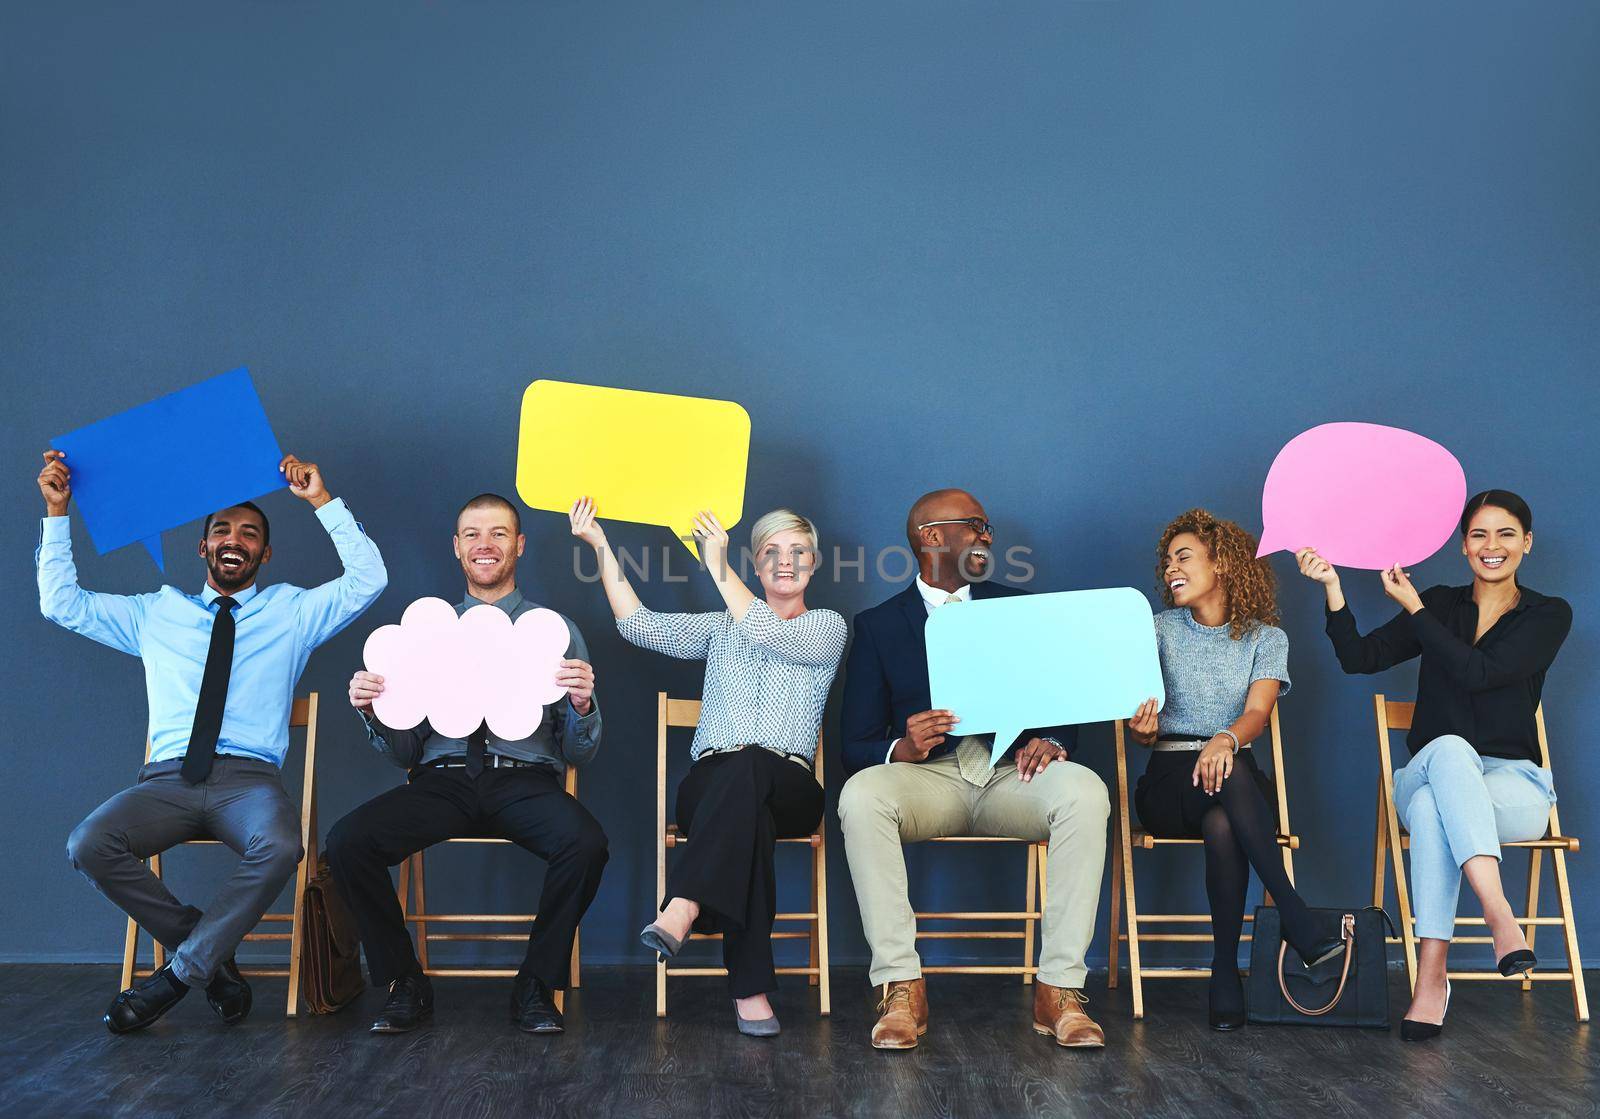 Shot of a group of people holding up speech bubbles against a blue background.